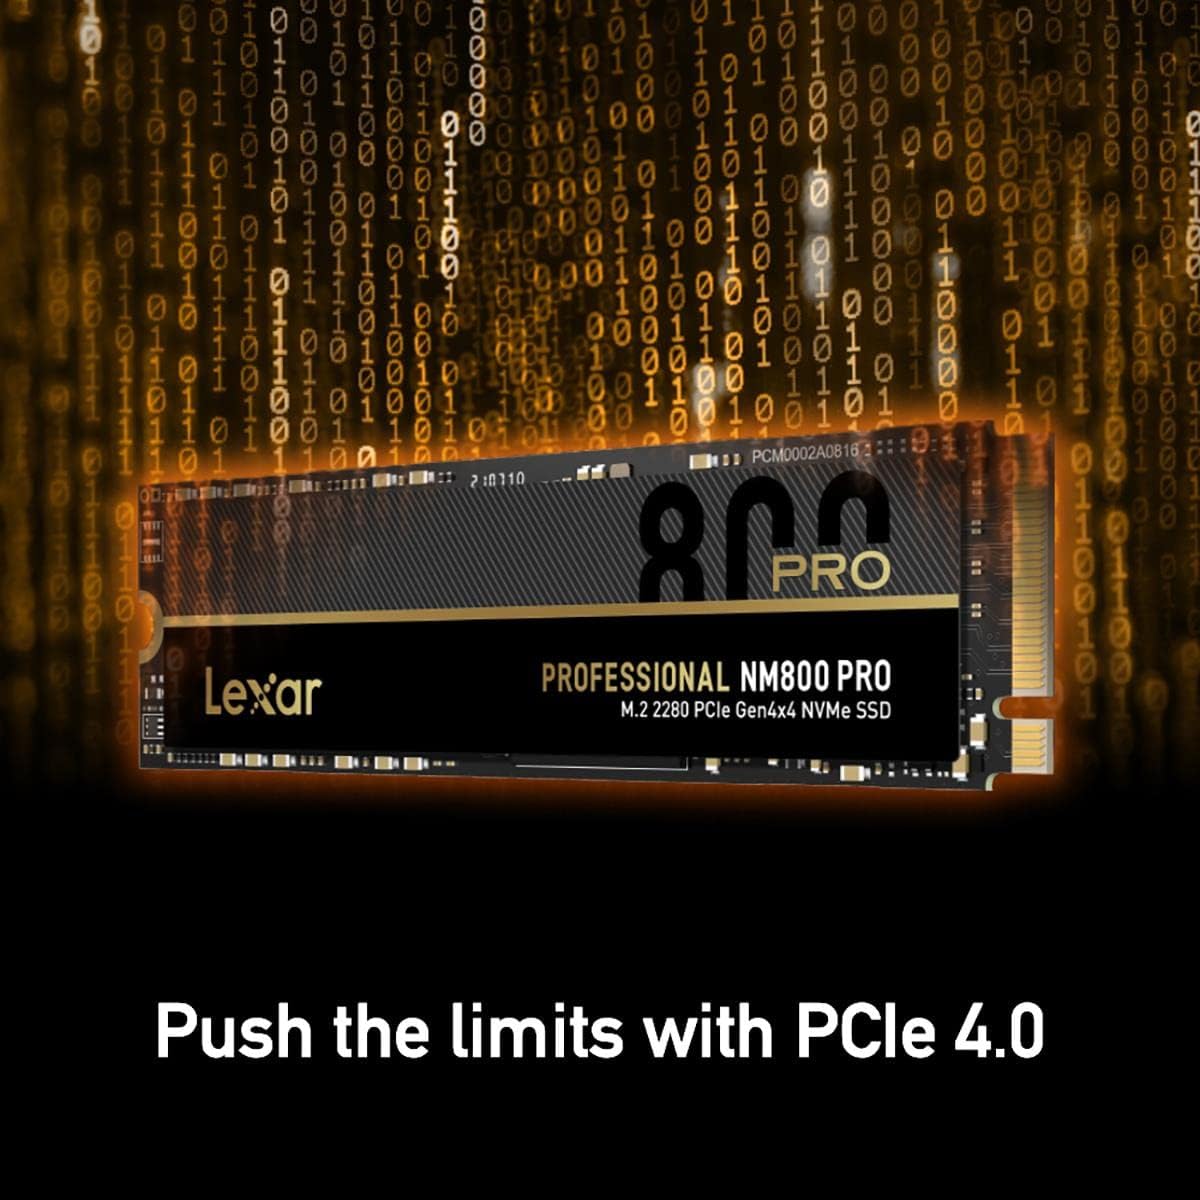 2TB Pro High Speed PCle Gen4 with 4 Lanes M.2 NvMe, Upto 7500Mb/s Read and 6300Mb/s Write